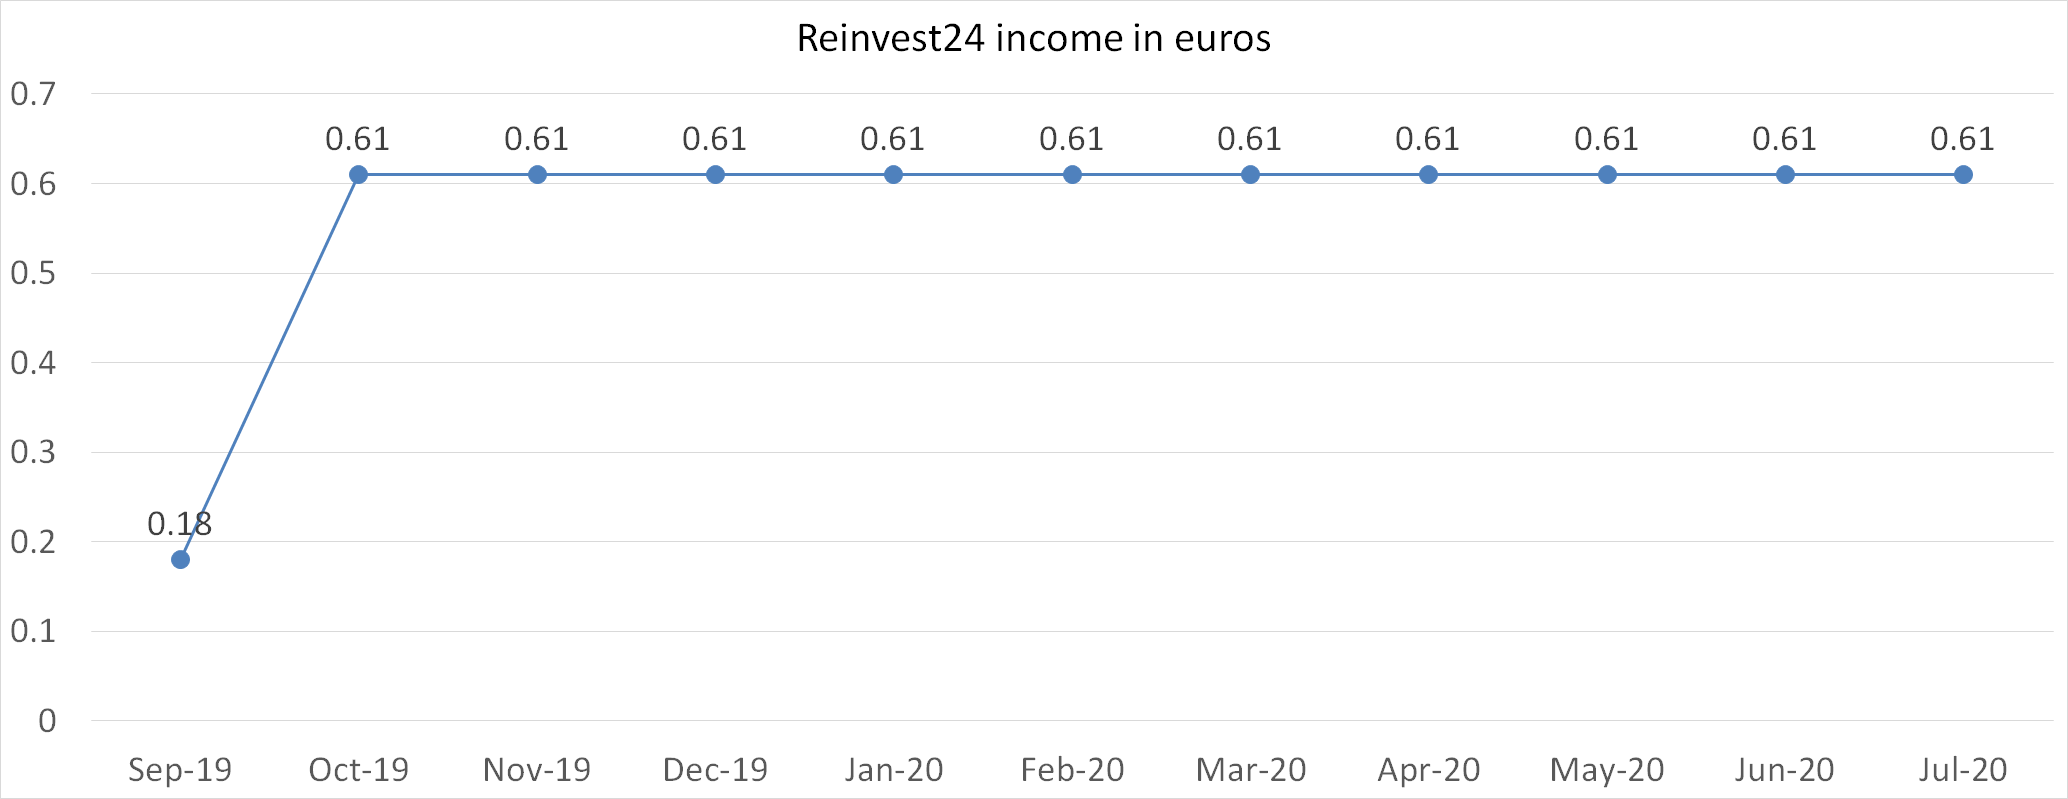 Reinvest24 income in euros august 2020